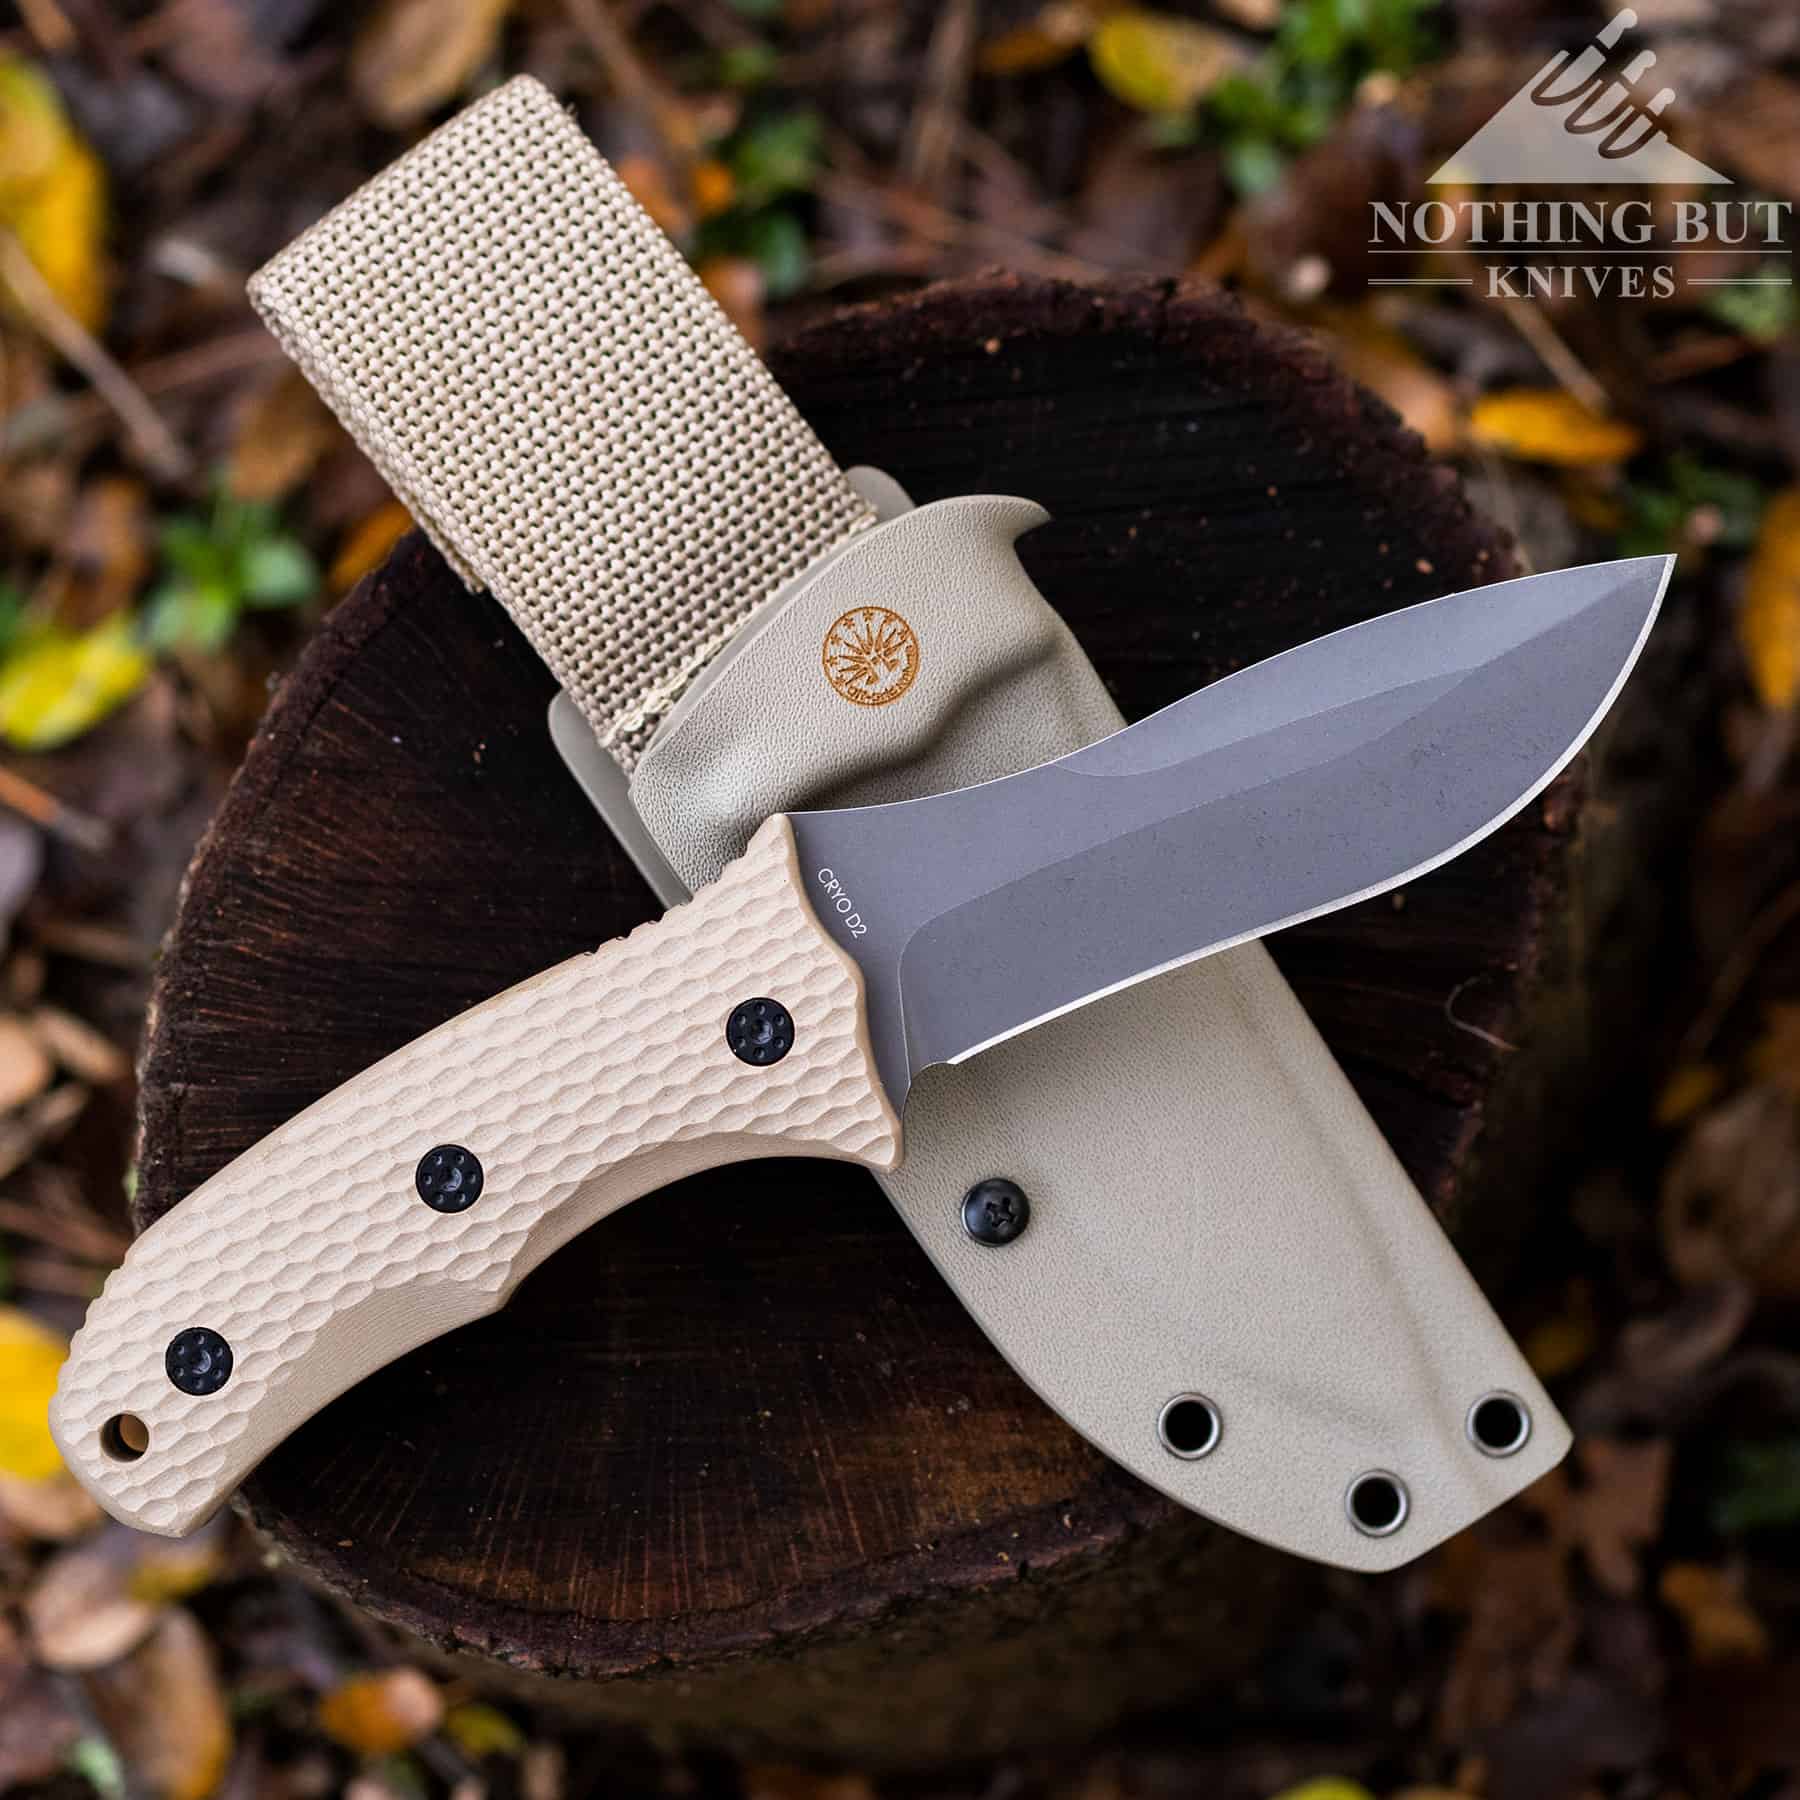 The new and improved sheath of the Backcountry is one of the best fixed blade sheaths we have tested. 